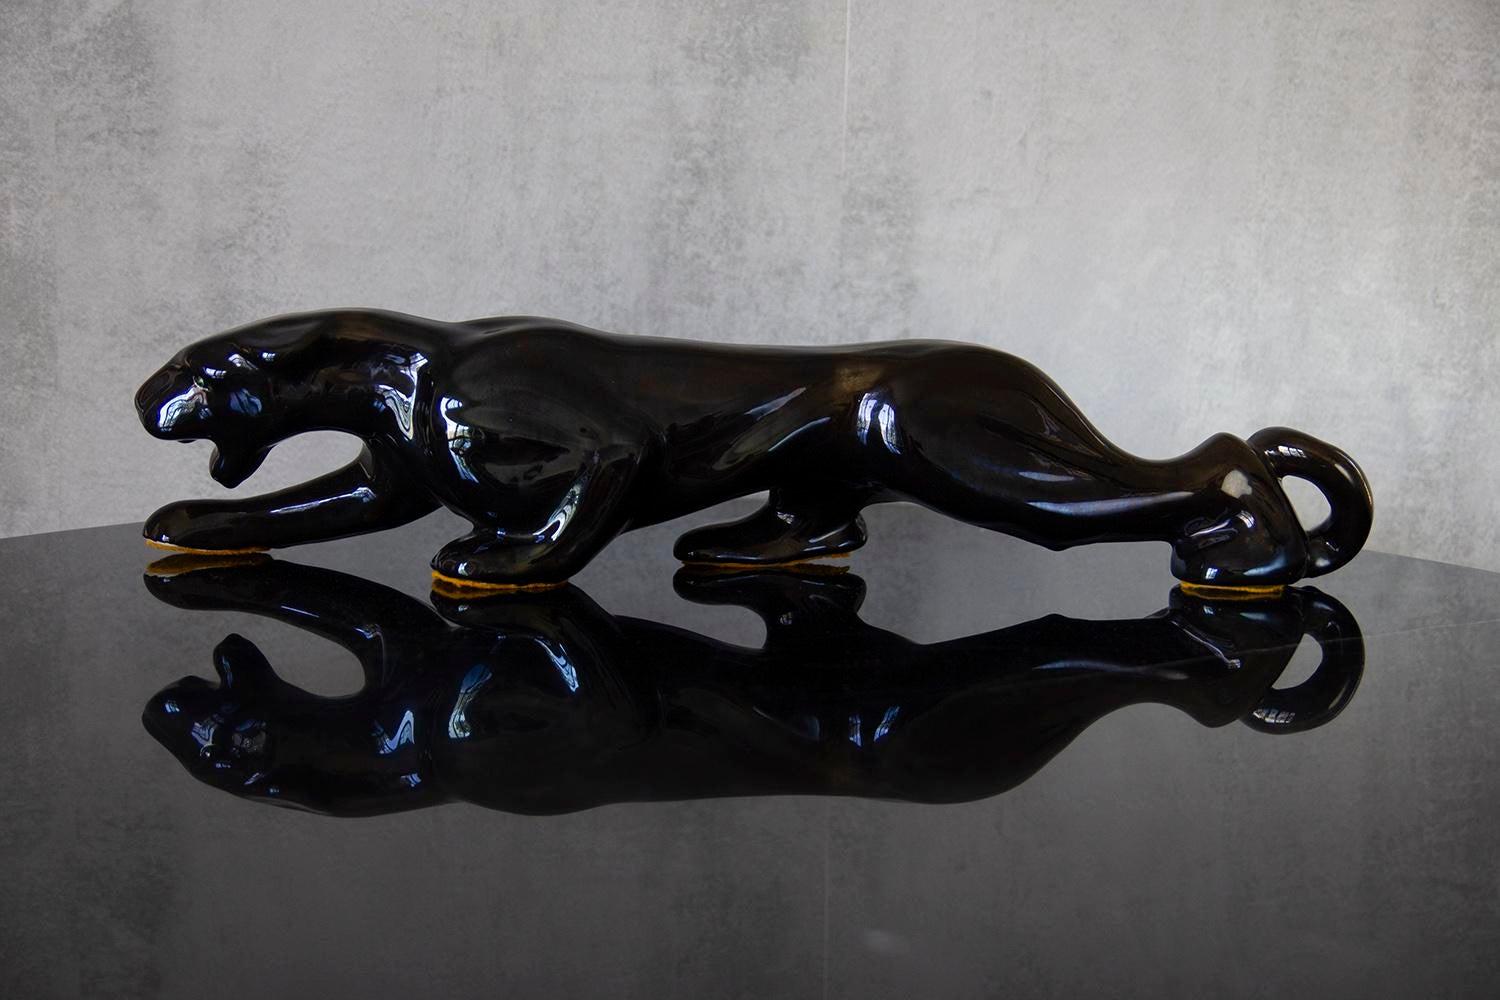 Awesome Mid-Century Modern Royal Haeger style ceramic black panther sculpture with green crystal eyes. Beautiful vintage condition with no cracks, chips, or crazing found. circa 1950s-1960s. This beast is a real beauty. In the style of Royal Haeger.